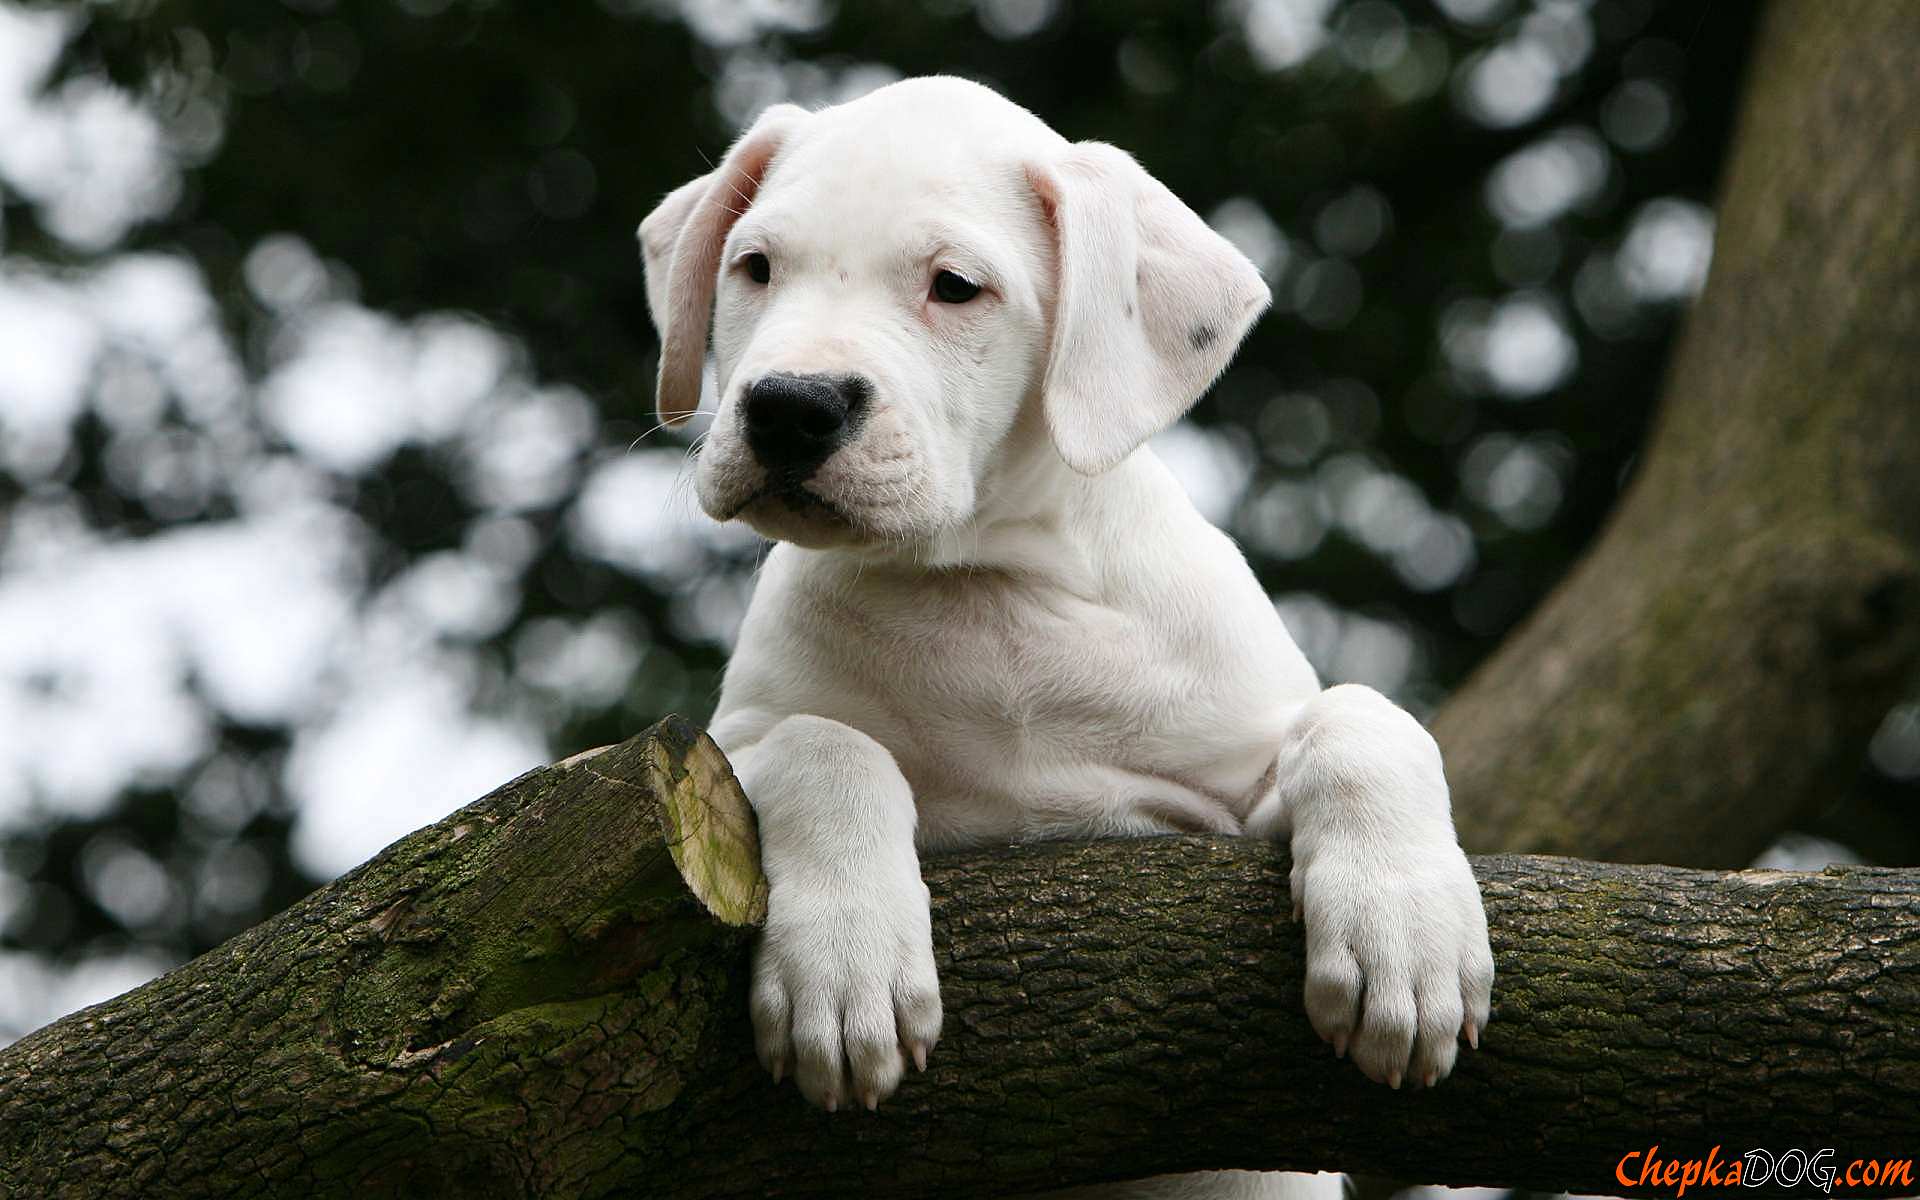 Dogo Argentino puppy on a tree.